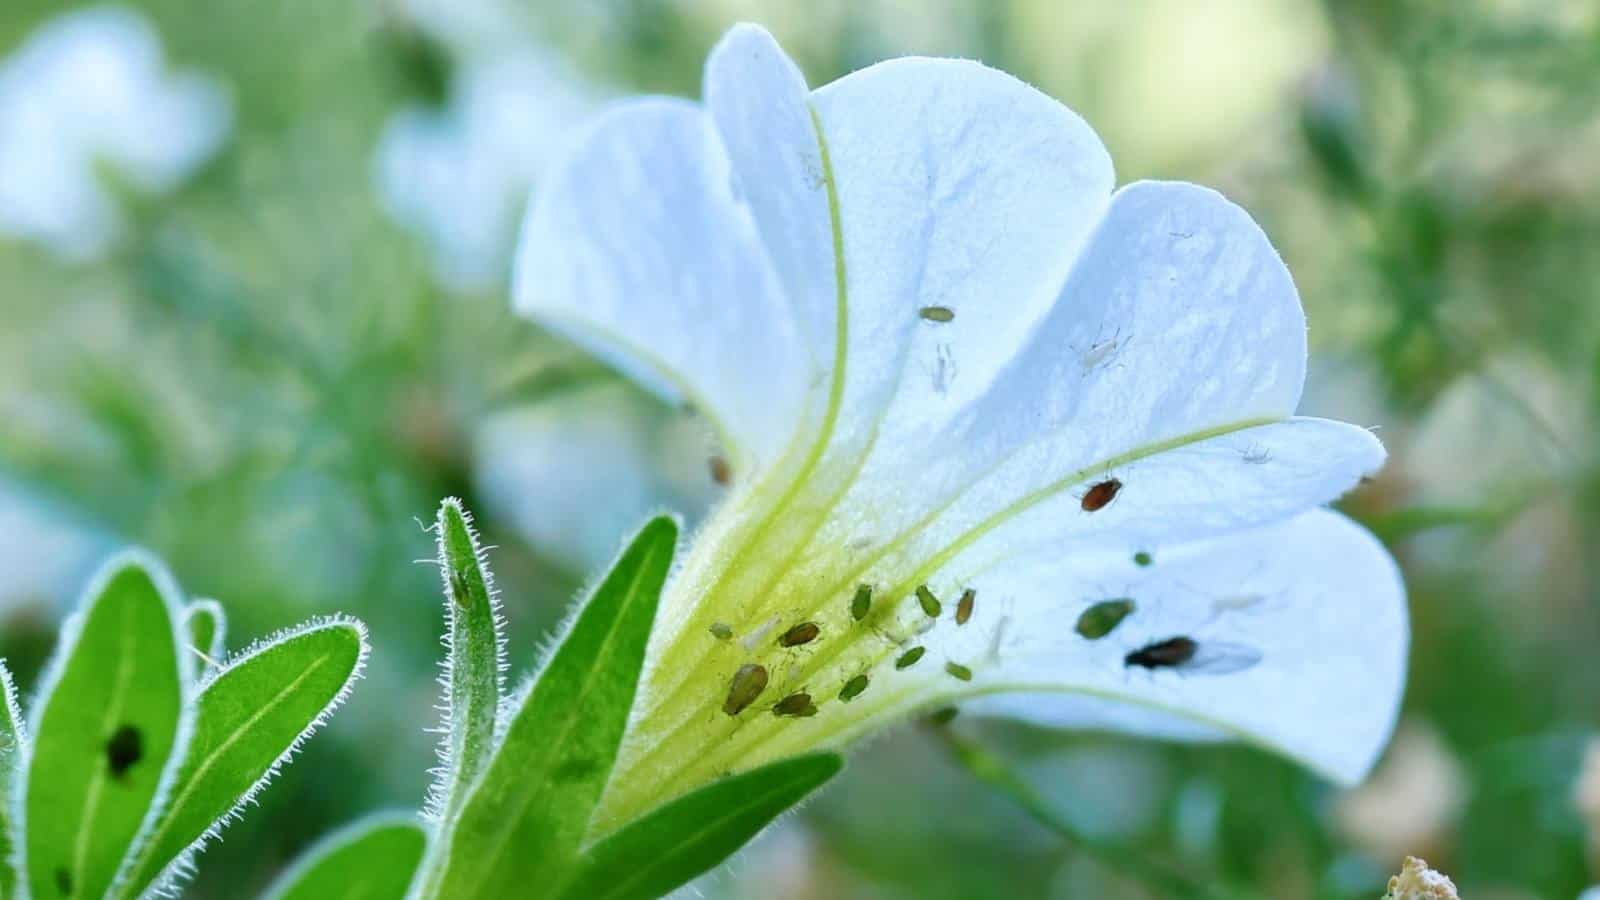 Aphids on a white calibrachoa flower